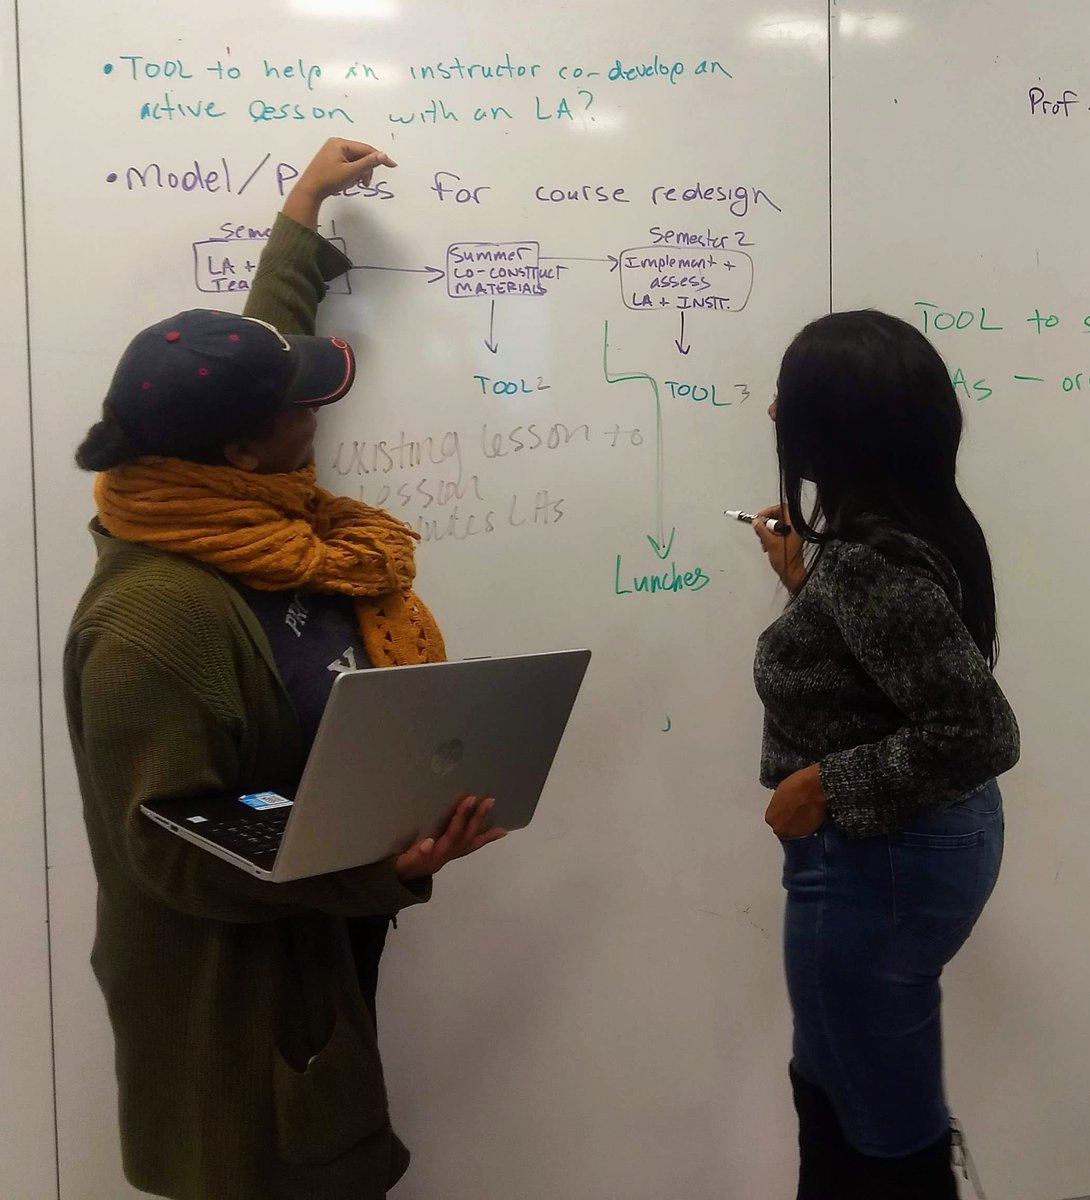 Excited about our group's research directions! Really enjoying collaborating and co-thinking with Jamia and Ember! @ChicagoState #WeAreCSU